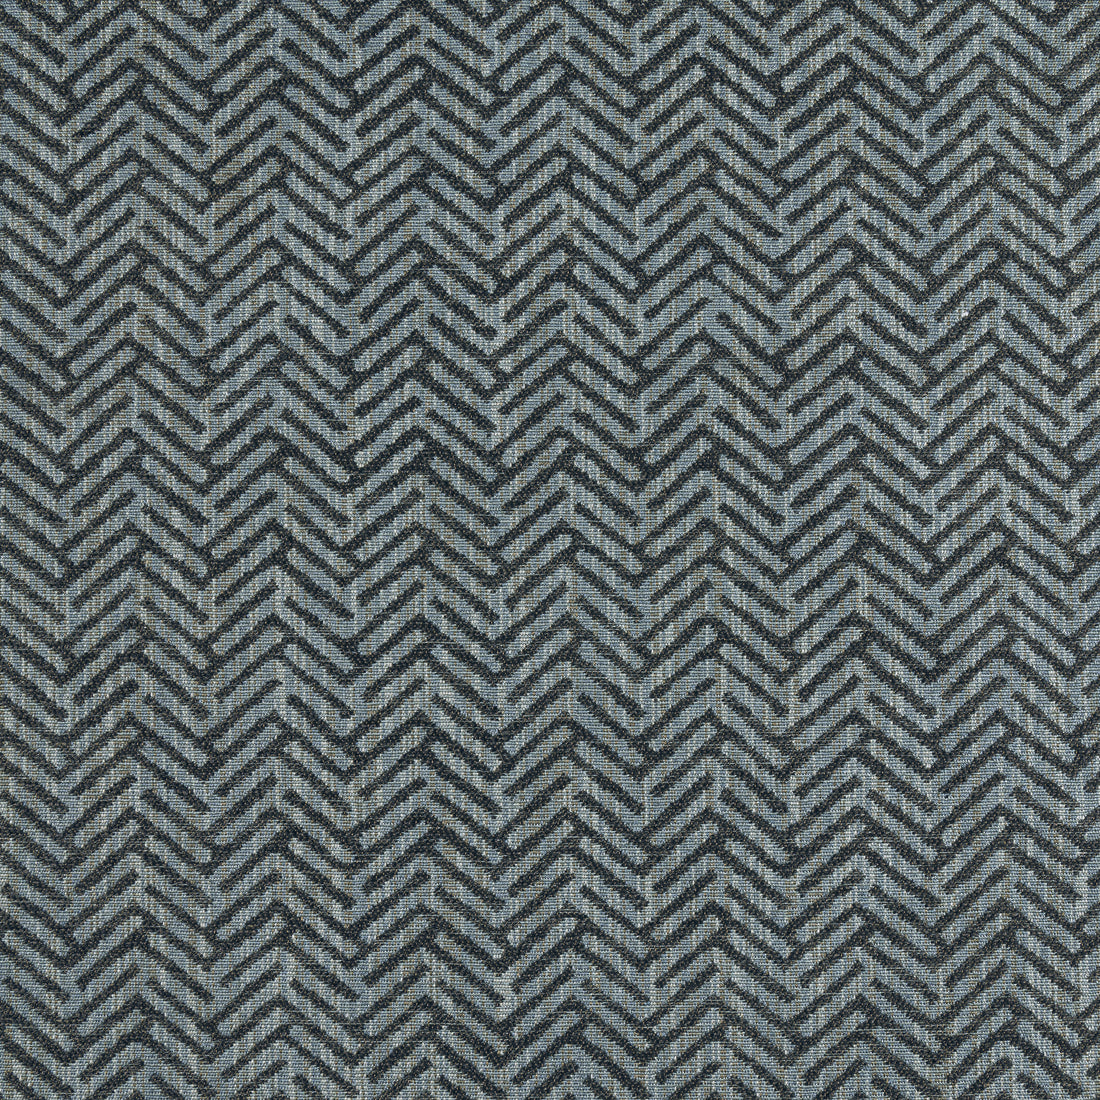 Varenna fabric in mineral color - pattern number W8113 - by Thibaut in the Sereno collection